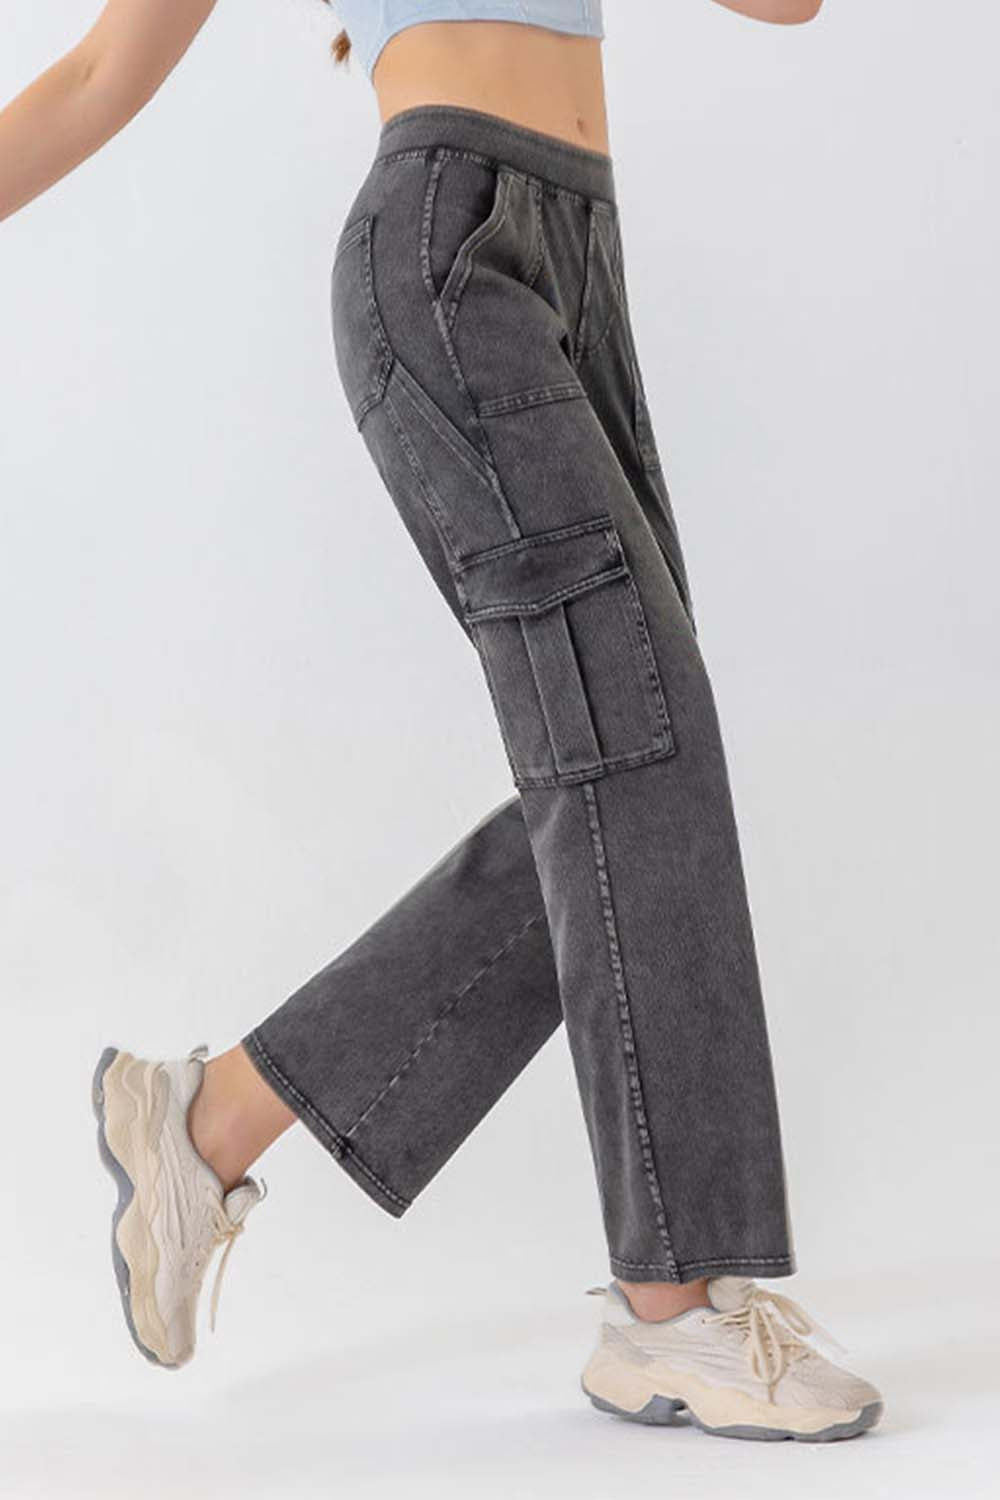 Buttoned Pocketed Long Jeans